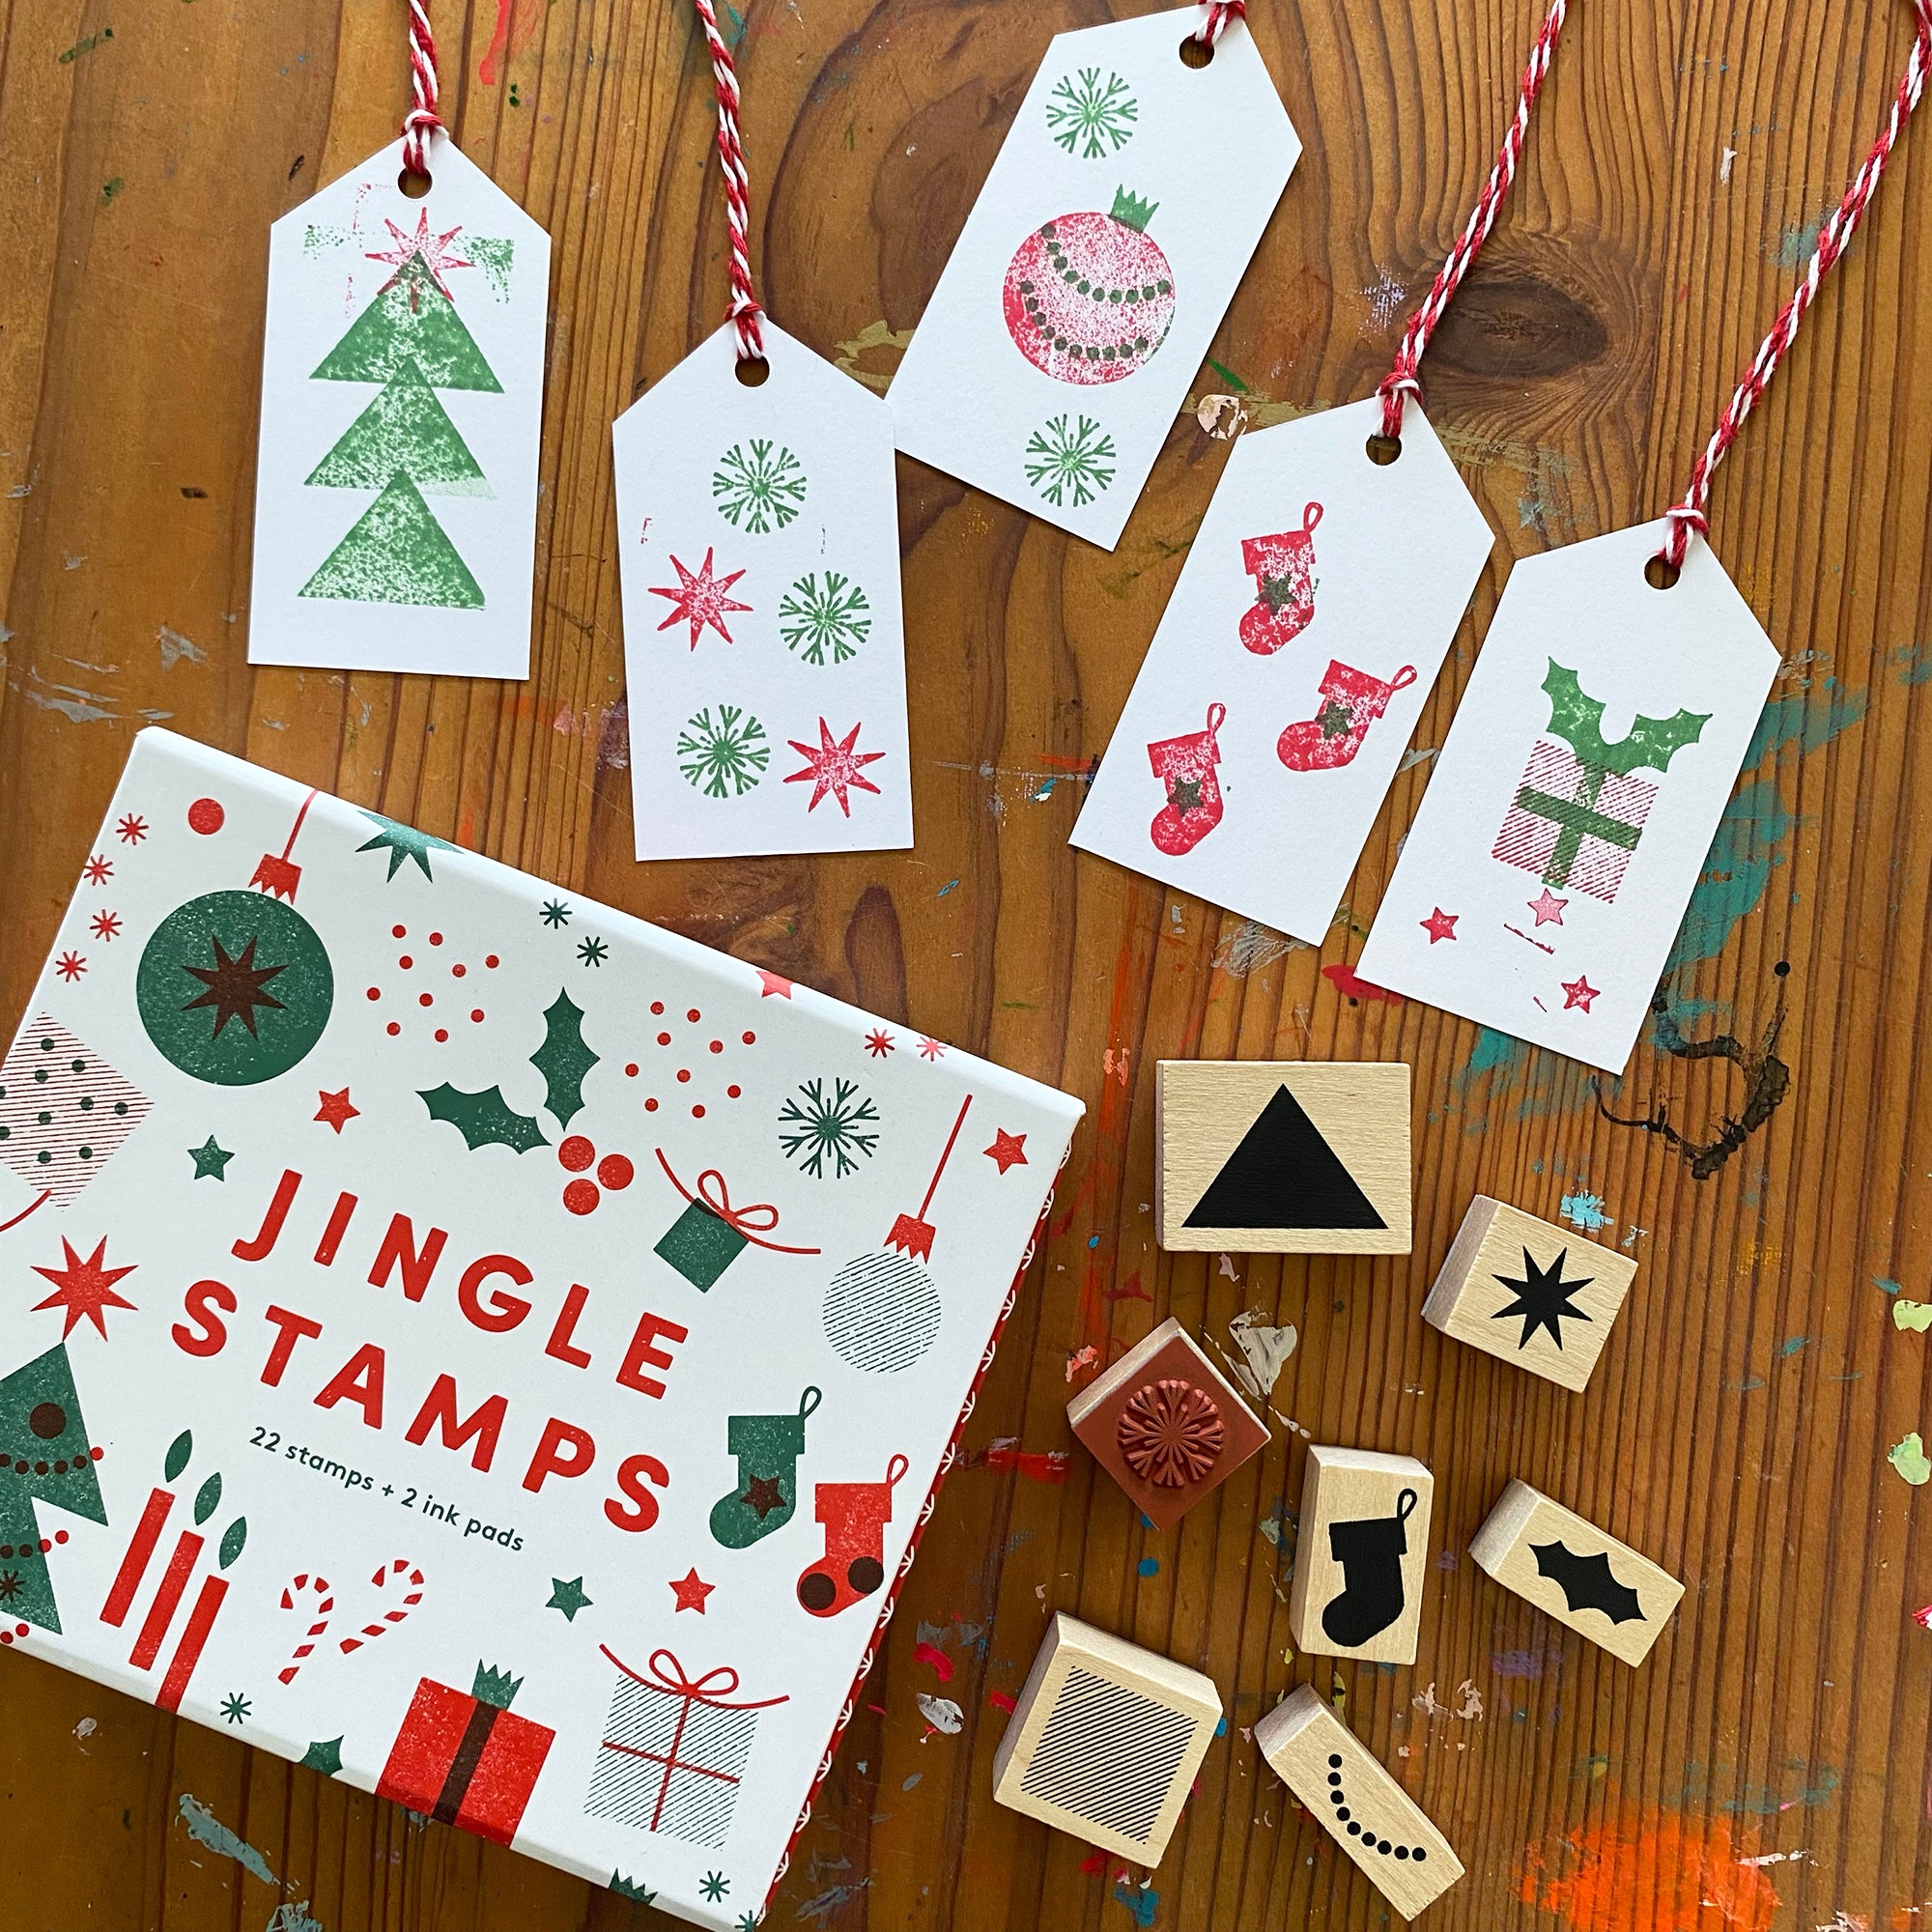 JINGLE STAMPS - 40% OFF